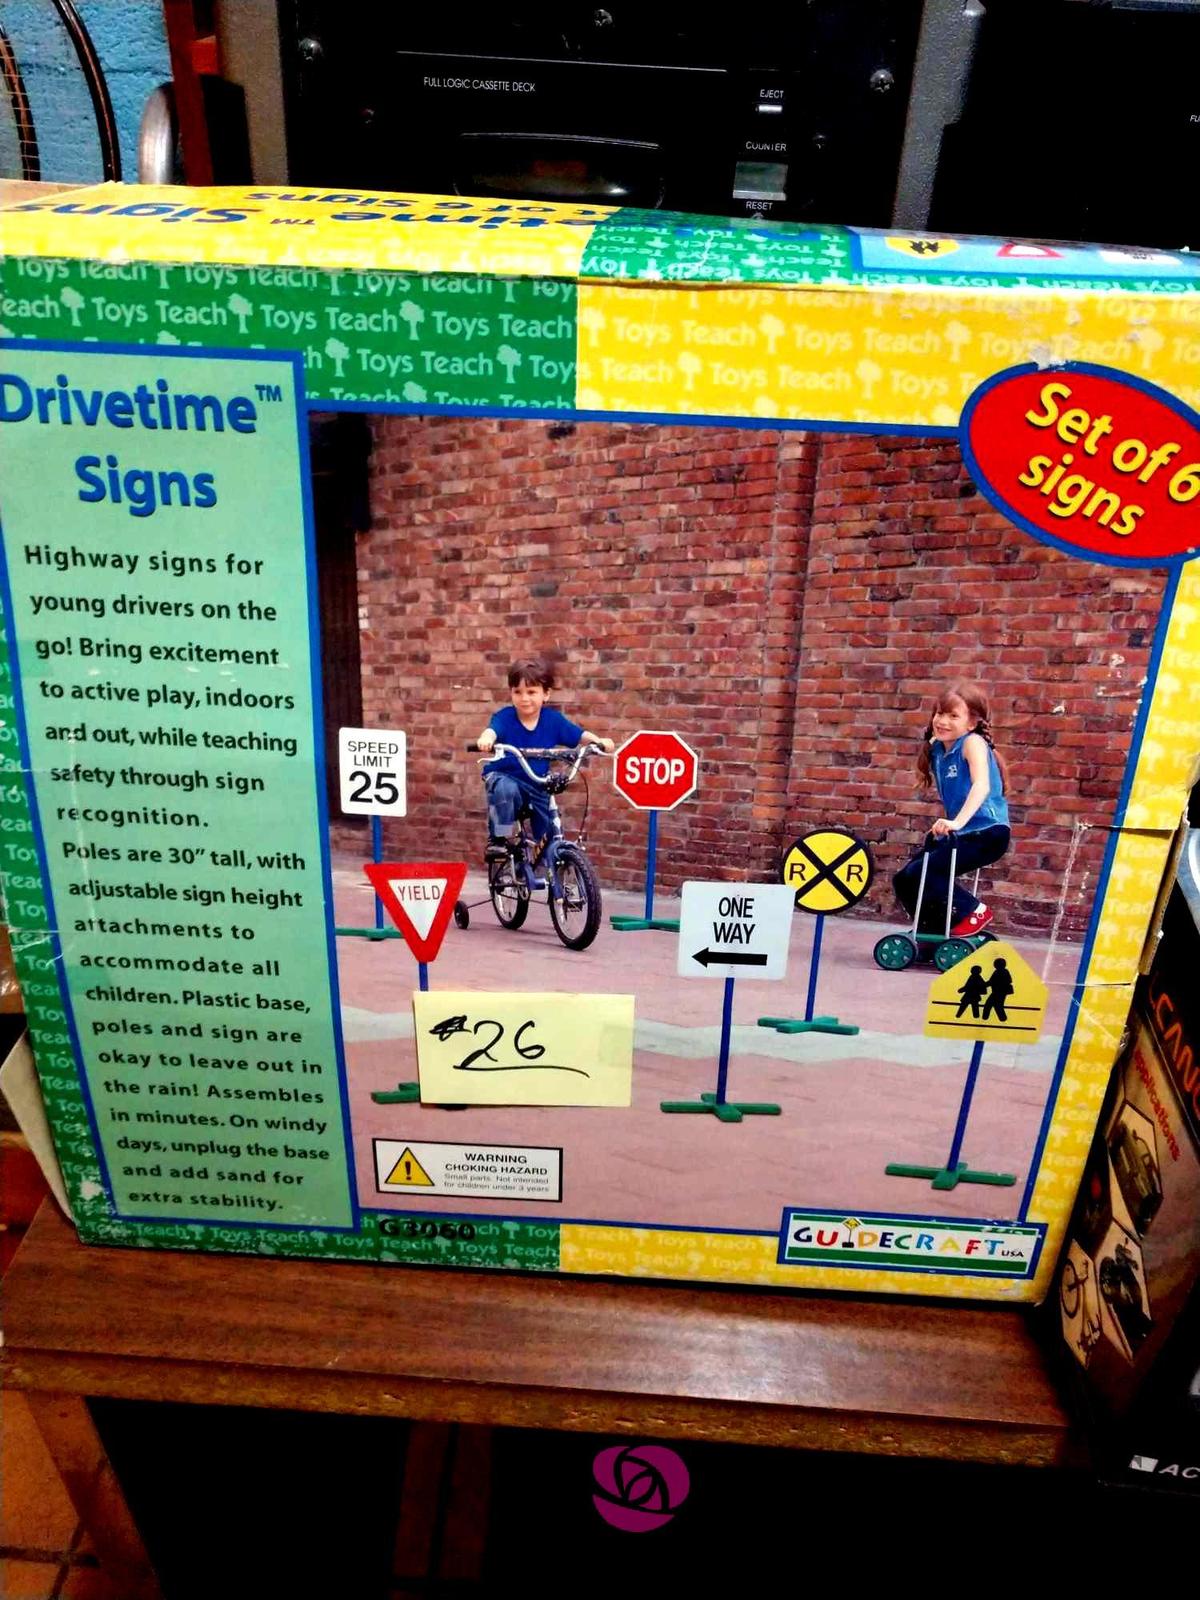 Drivetime signs